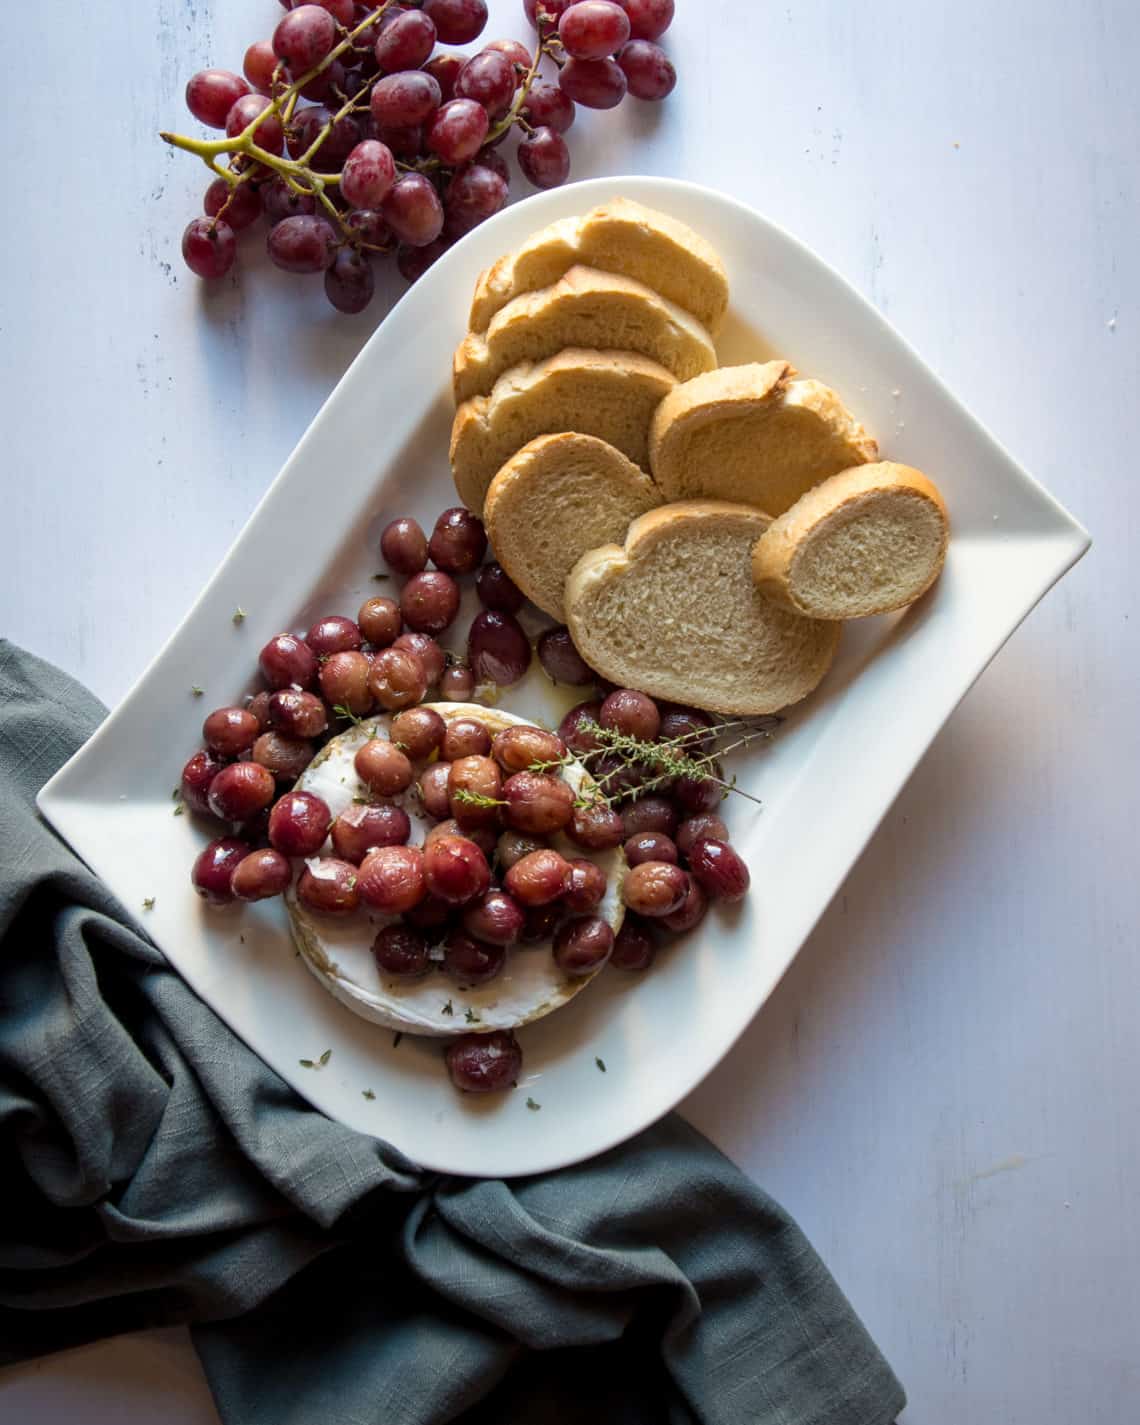 Plate of roasted grapes and baked brie